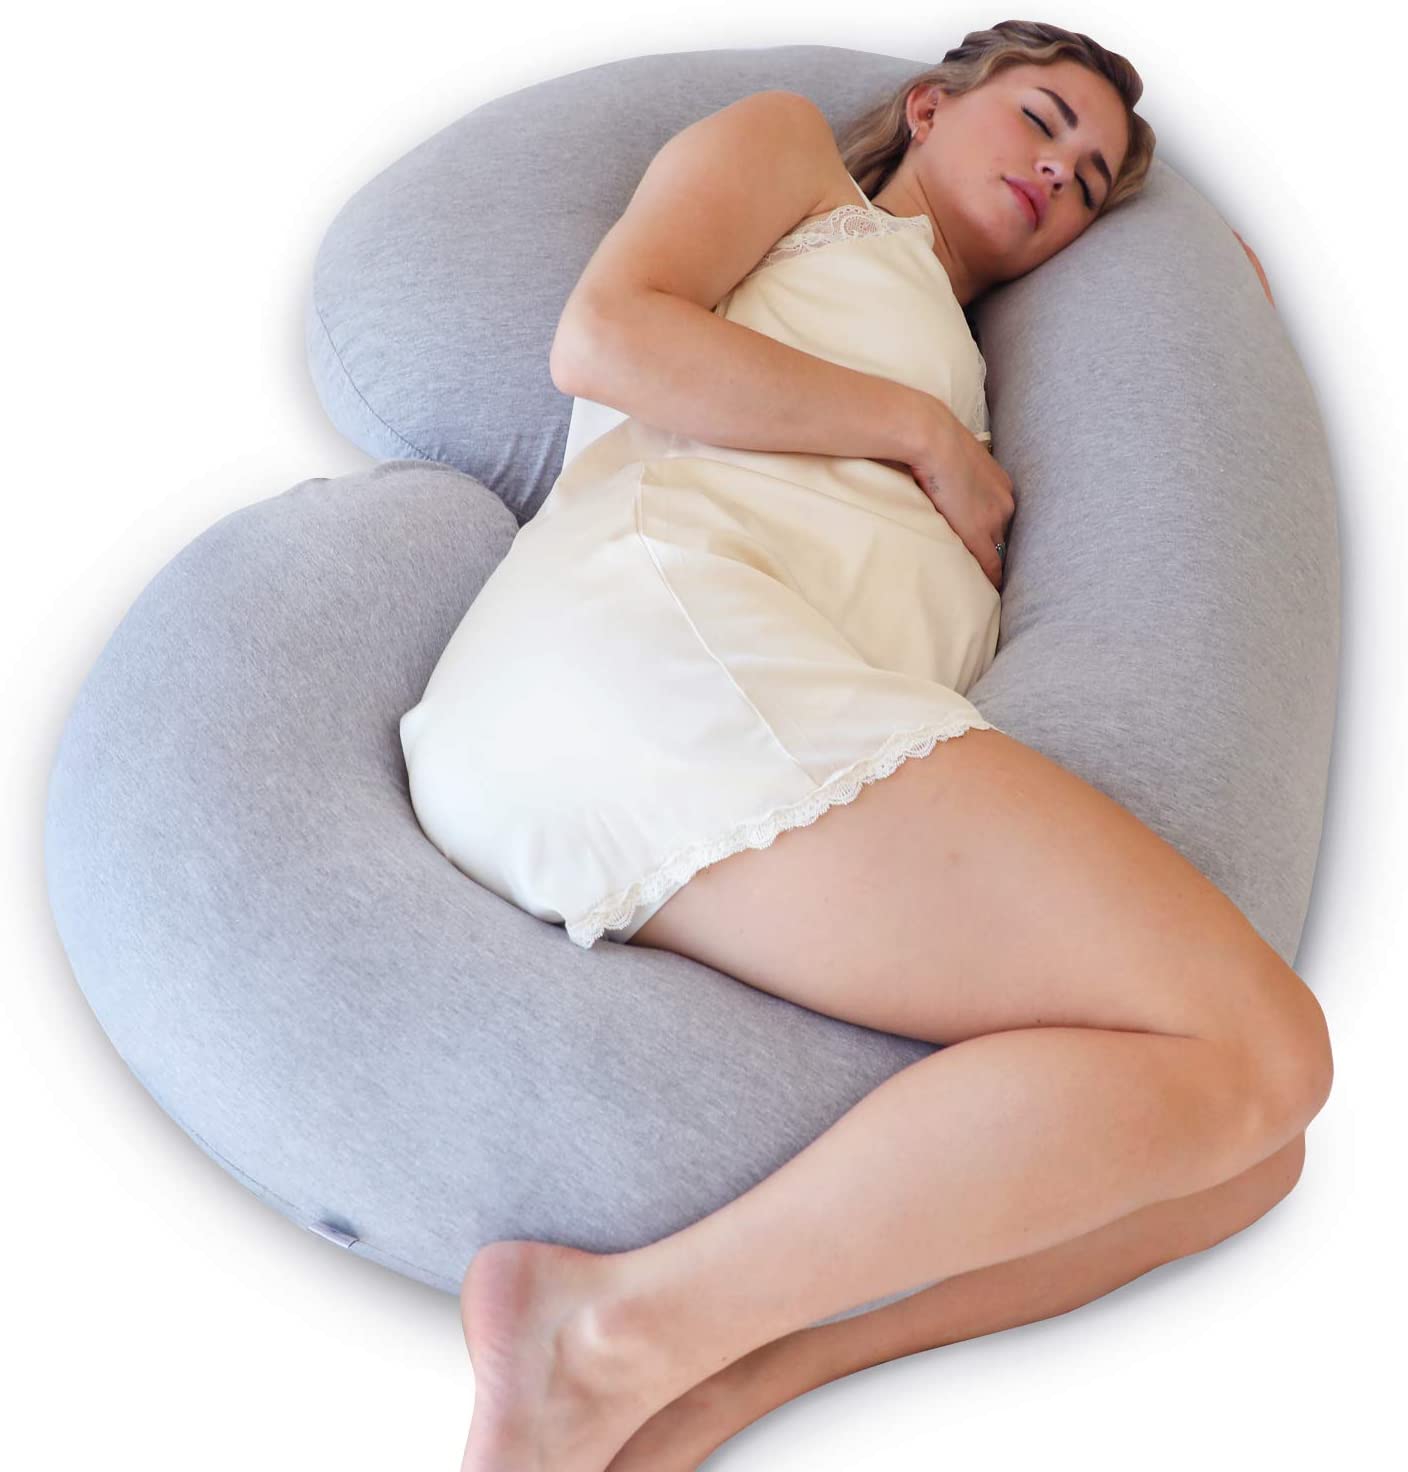 The PharMeDoc Pregnancy Pillow Is the Best for My Back Pain (and I'm Not  Even Pregnant)